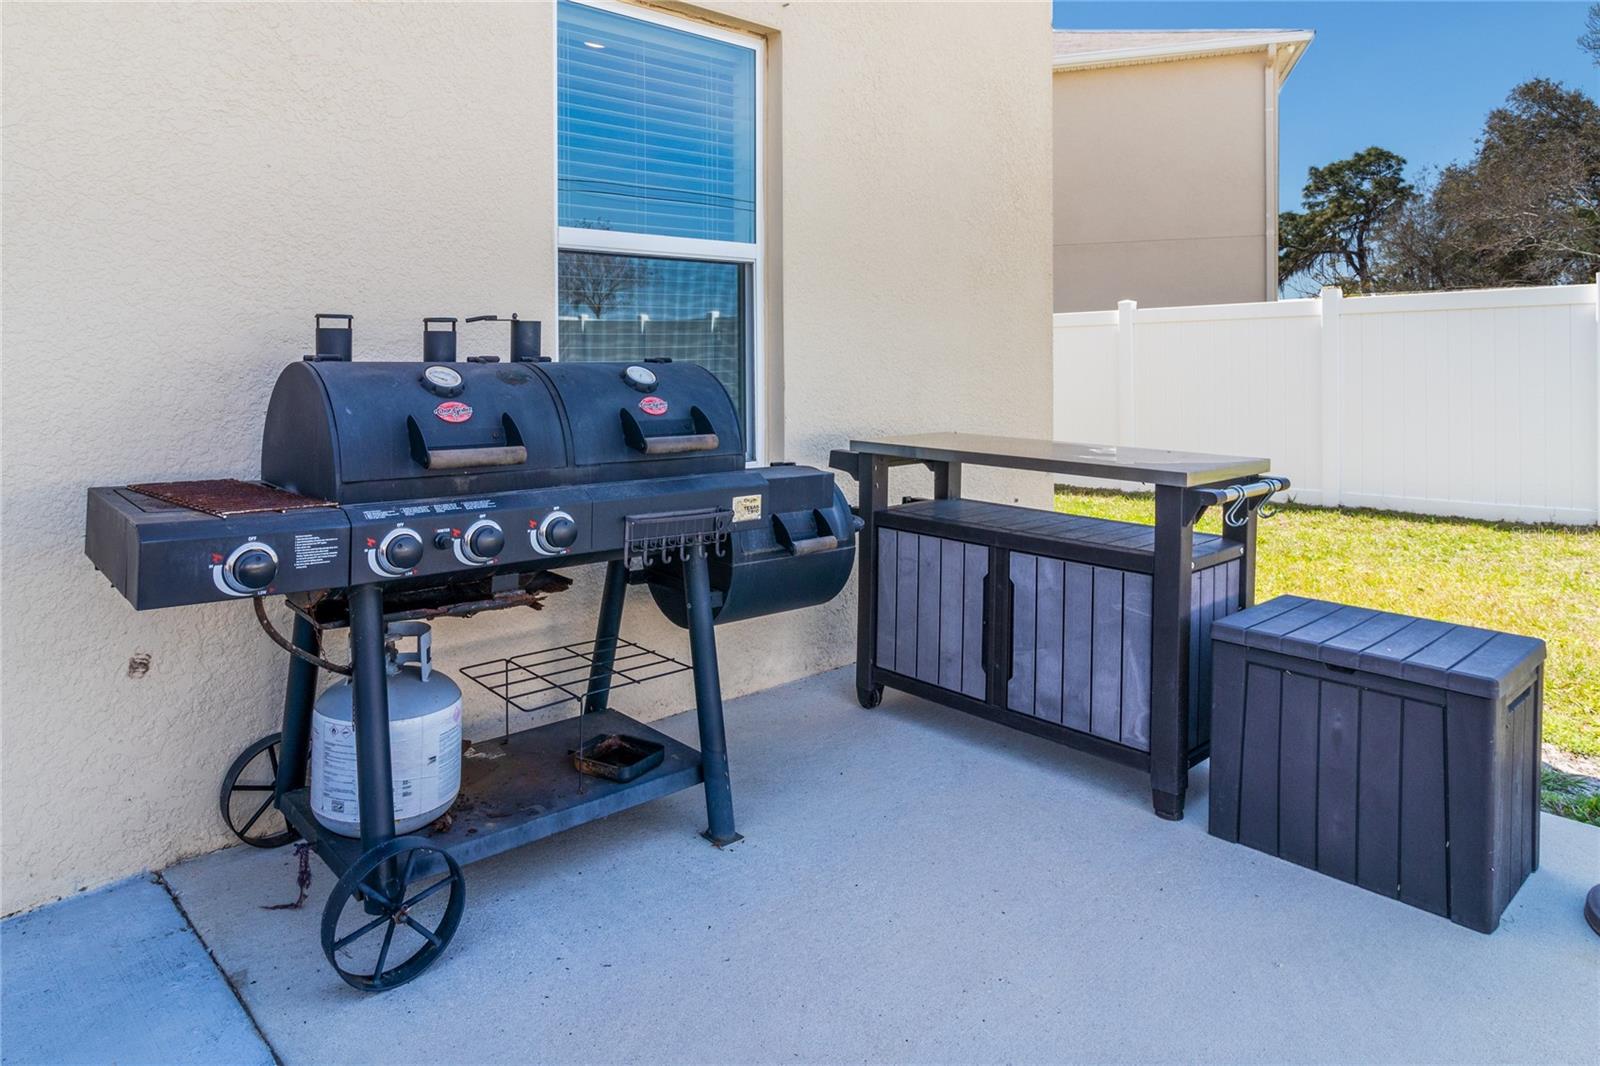 Grill, counter & bin all negotiable